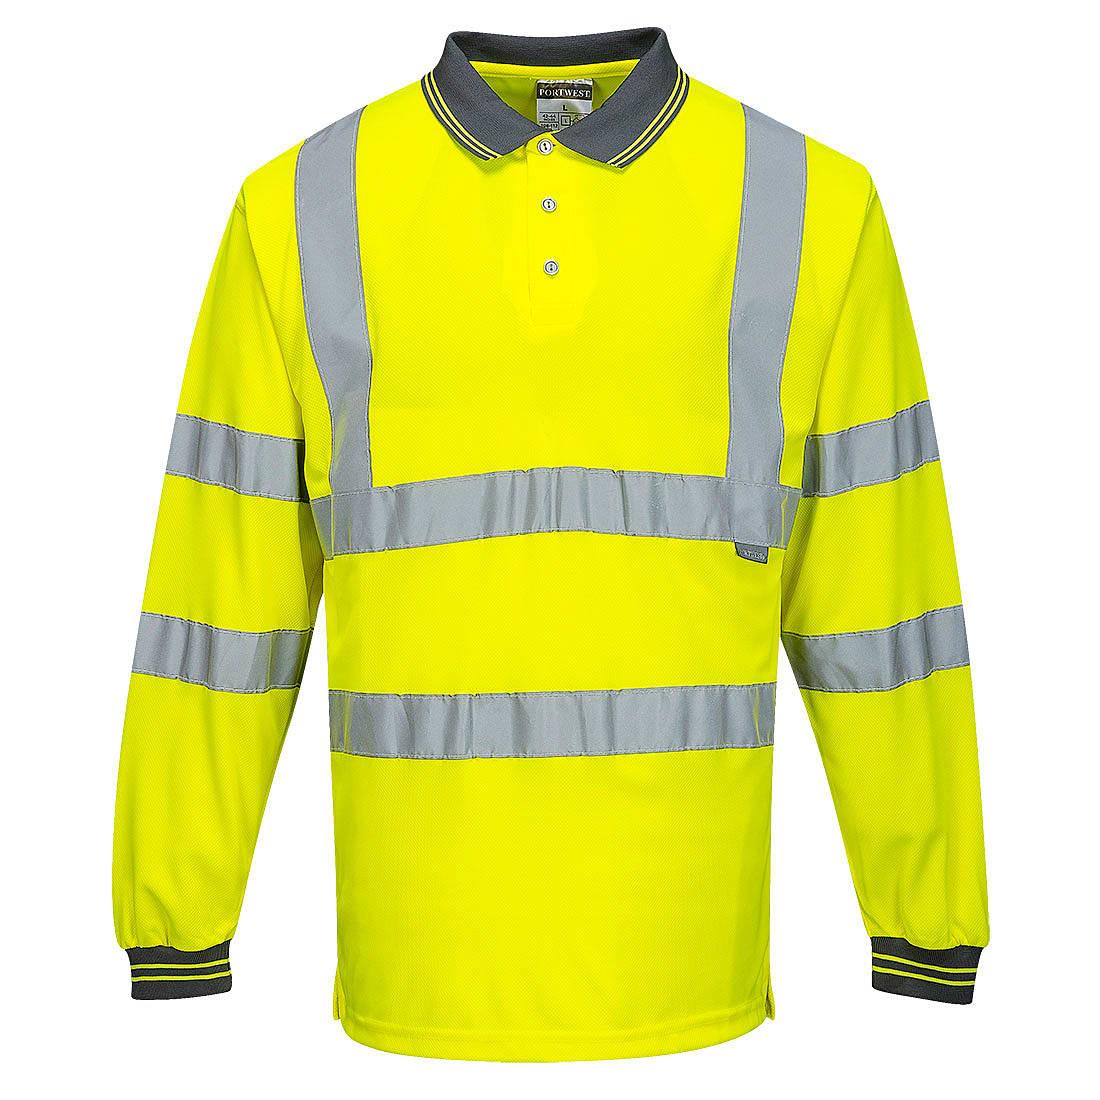 Portwest Hi-Viz Long-Sleeved Polo Shirt in Yellow (Product Code: S277)